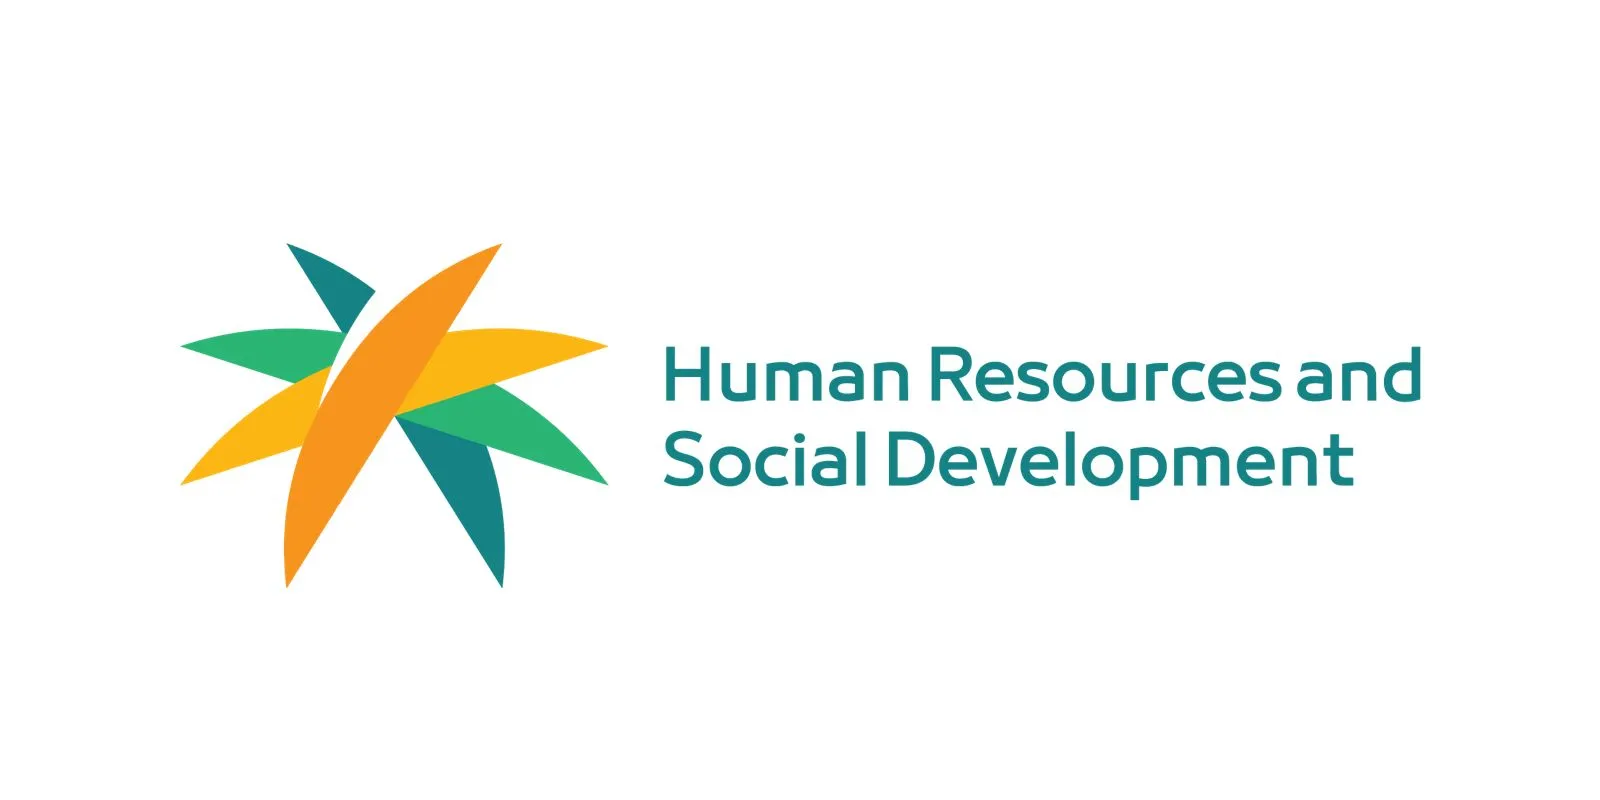 Human Resources and Social Development